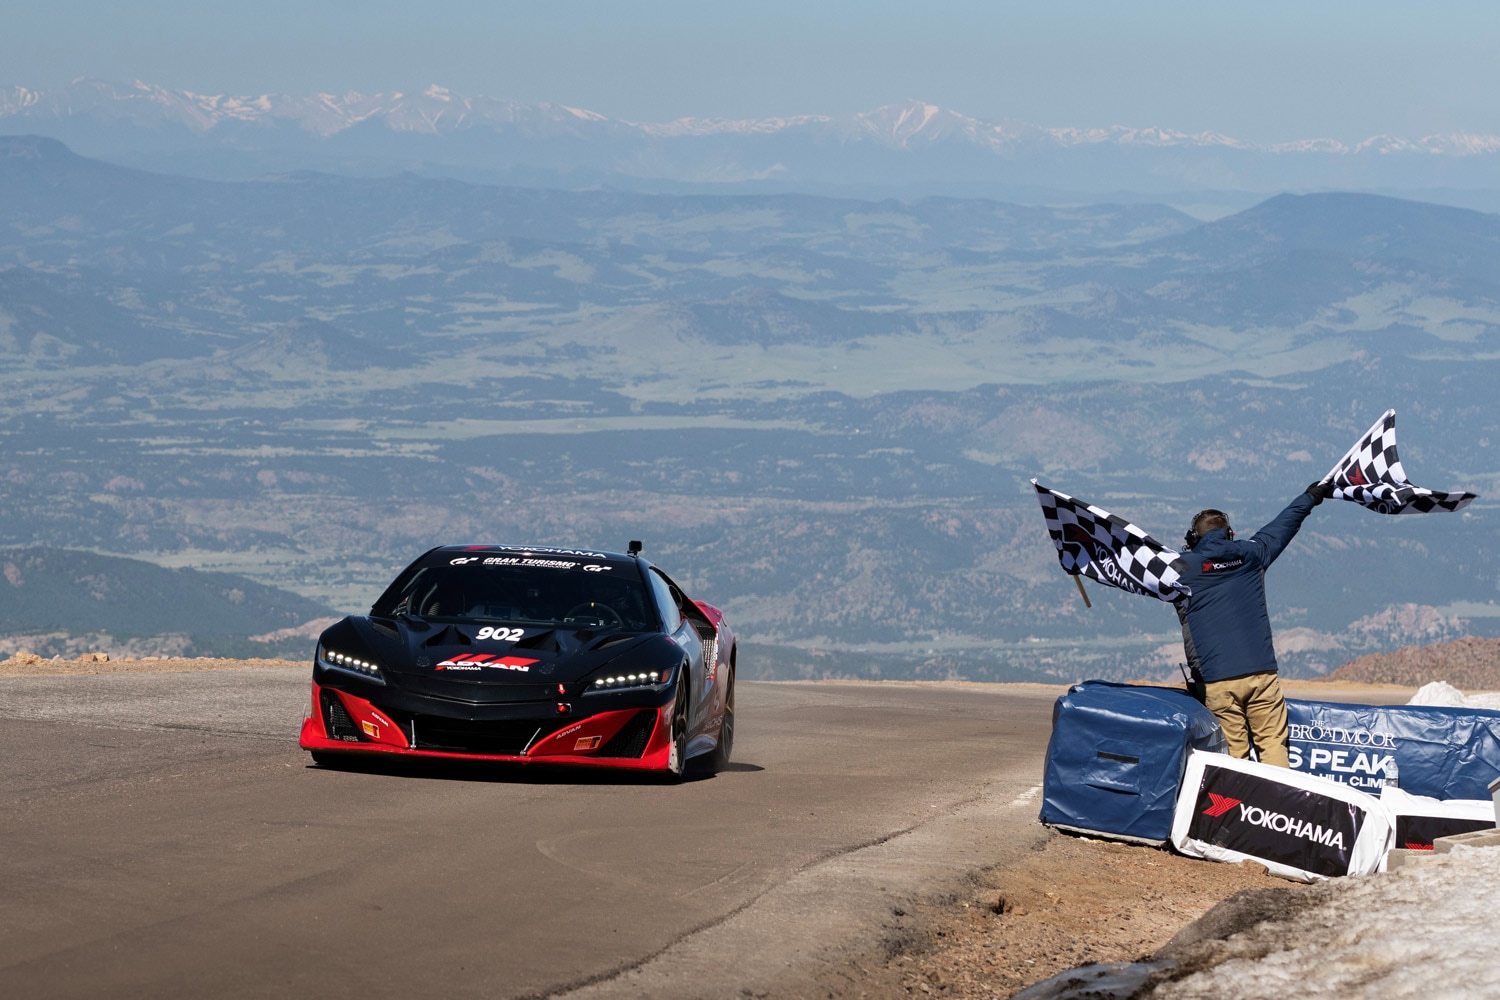 A black Acura NSX crosses the finish line at the summit of Pikes Peak